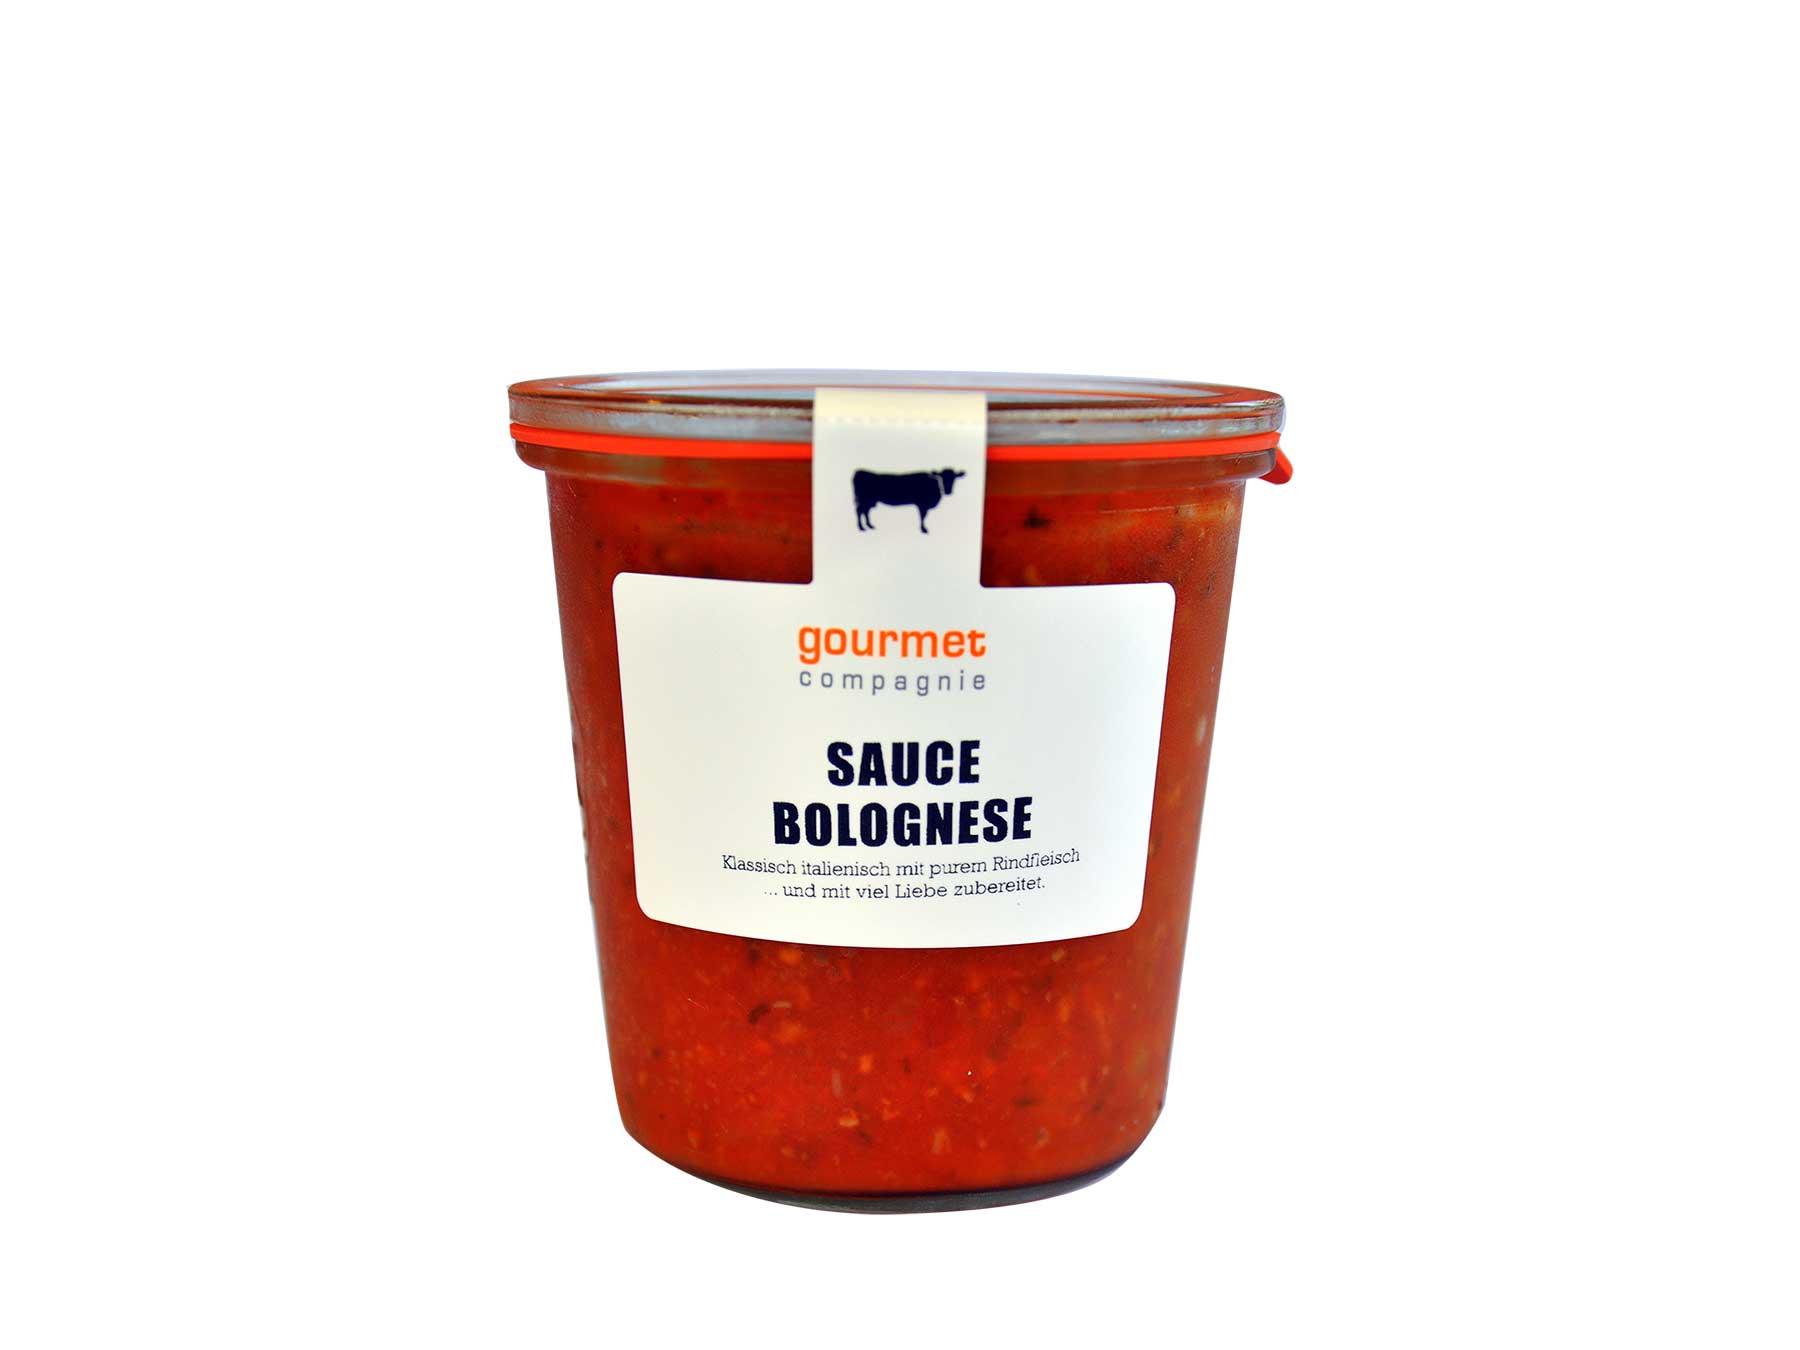 Gourmet Compagnie Sauce Bolognese